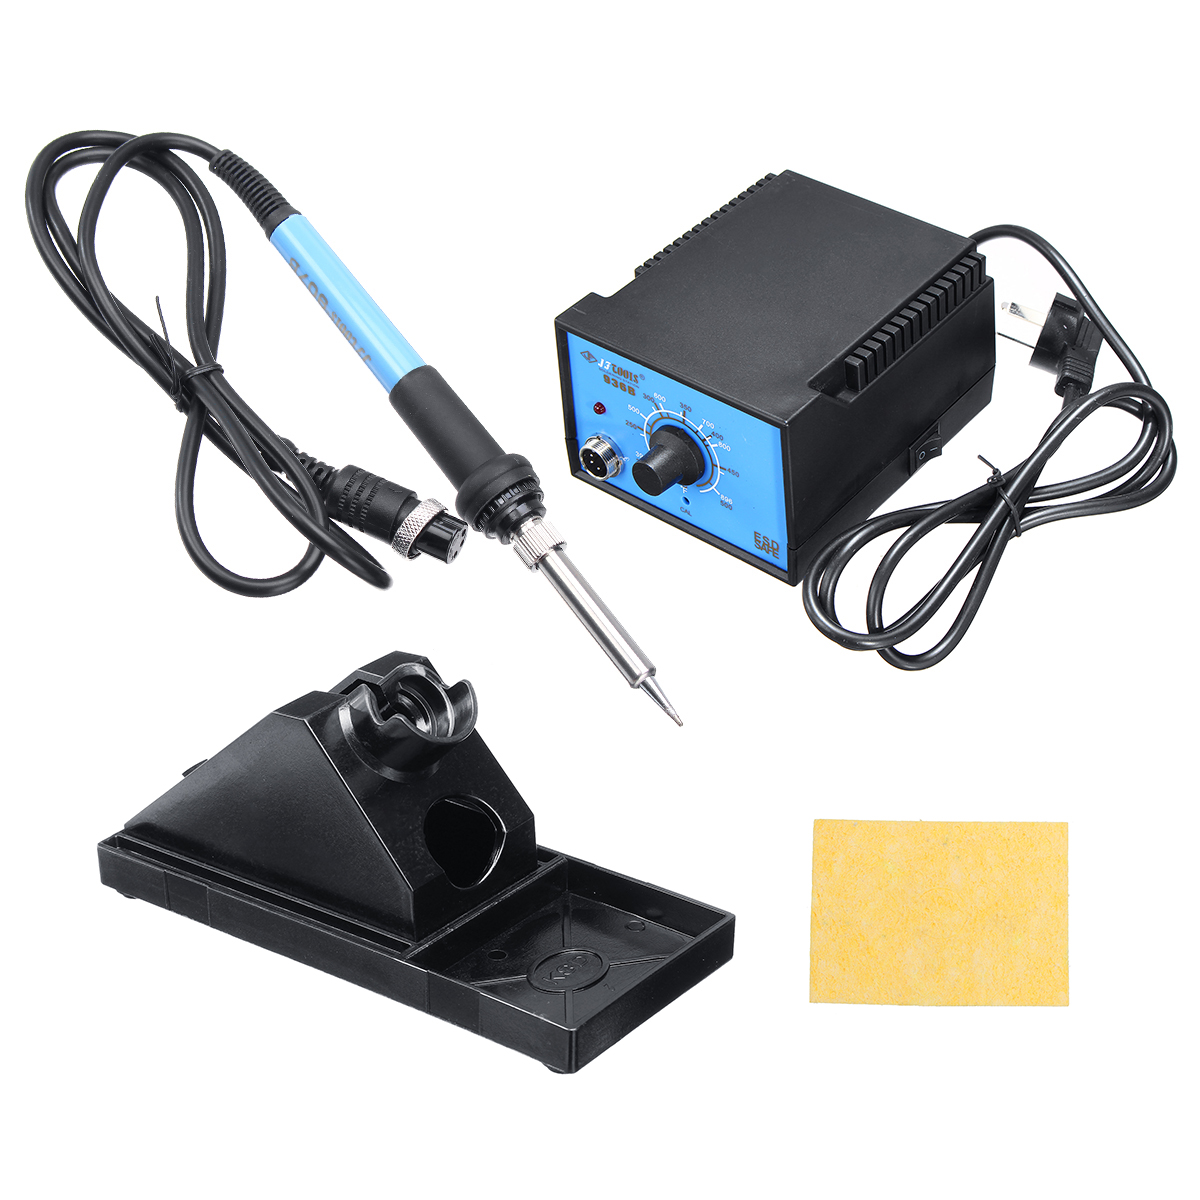 

60W Anti-static Adjustable Thermostat Electric Soldering Iron Pen Welding Station With Stand Desoldering Tools